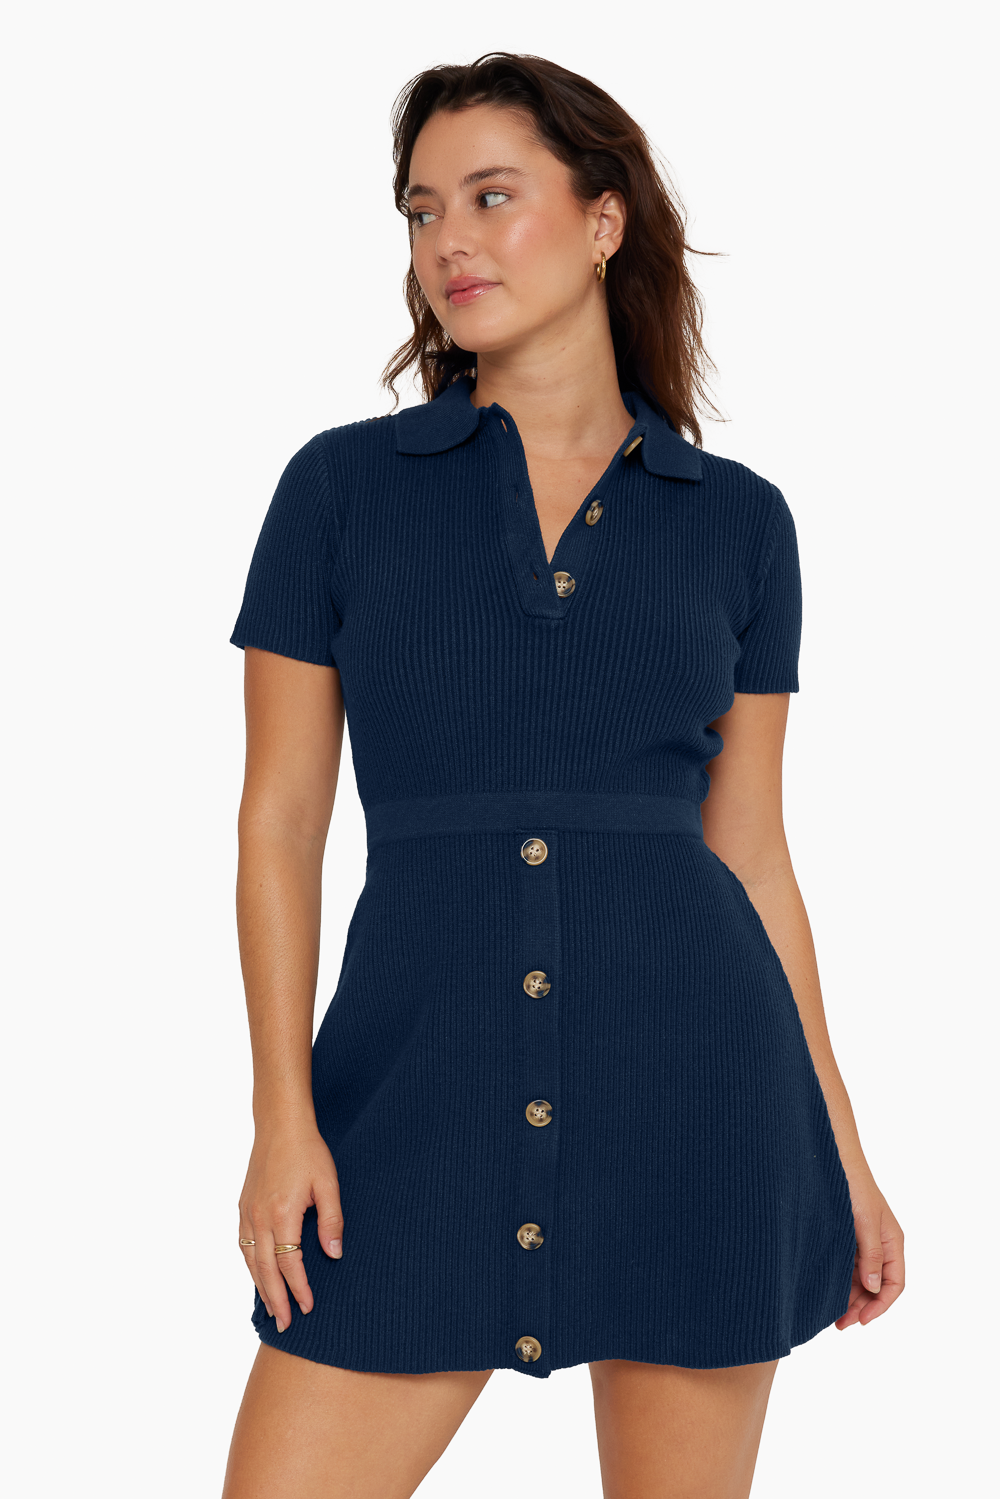 SET™ POLO KNIT DRESS IN EMPIRE